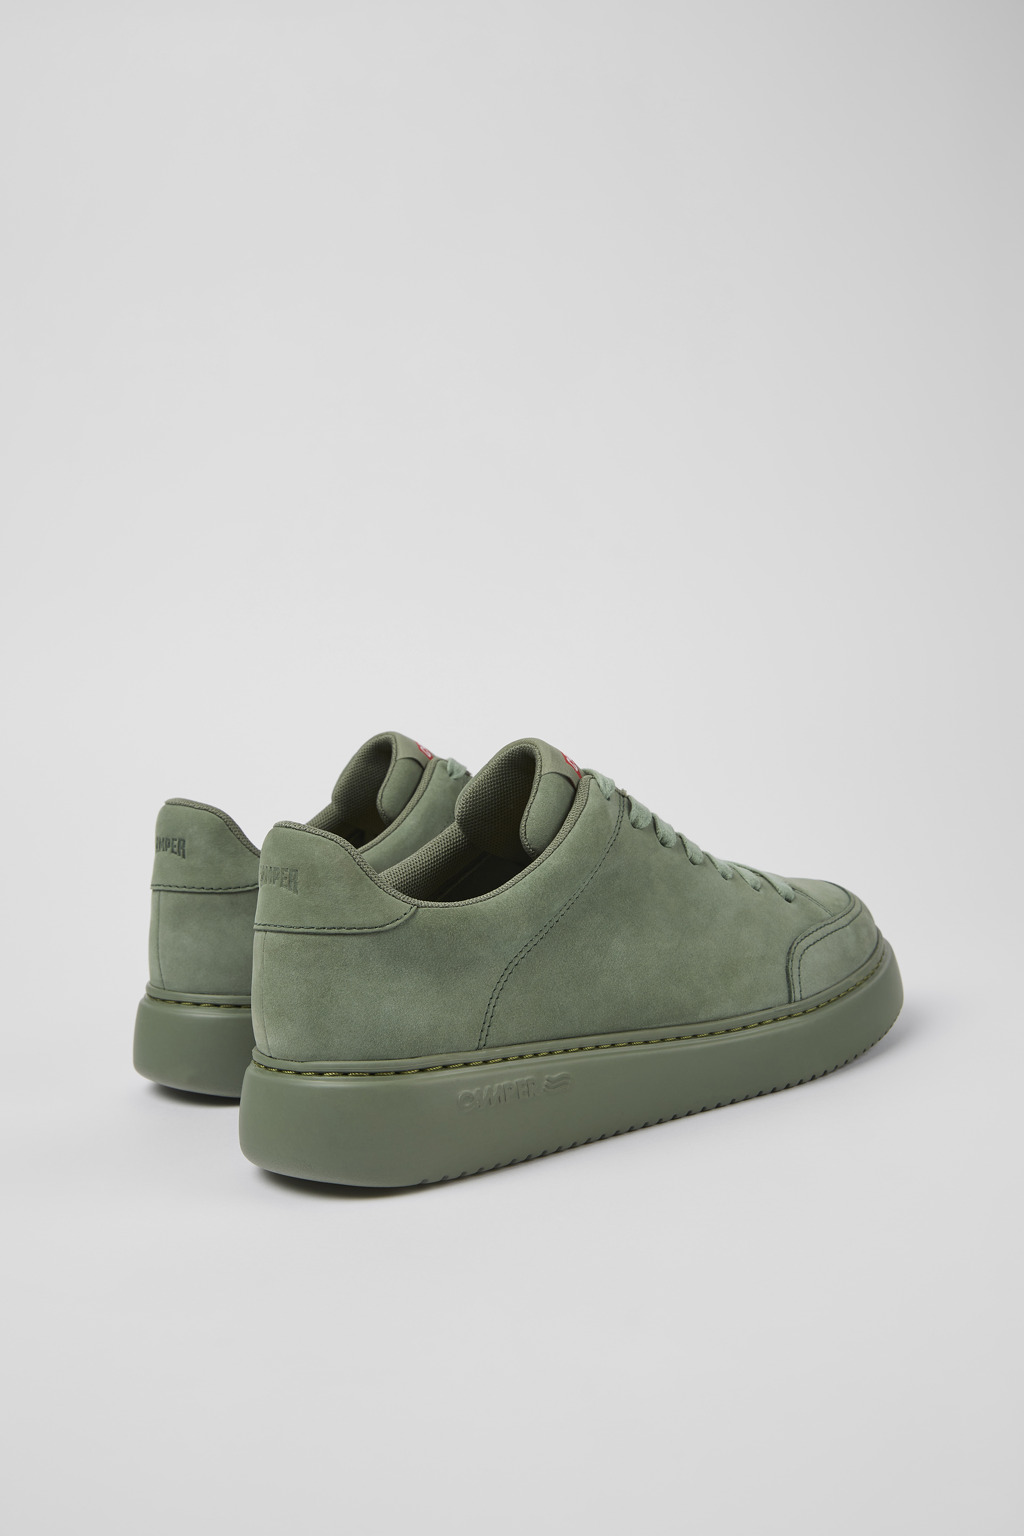 runner Green Sneakers for Men - Fall/Winter collection - Camper USA